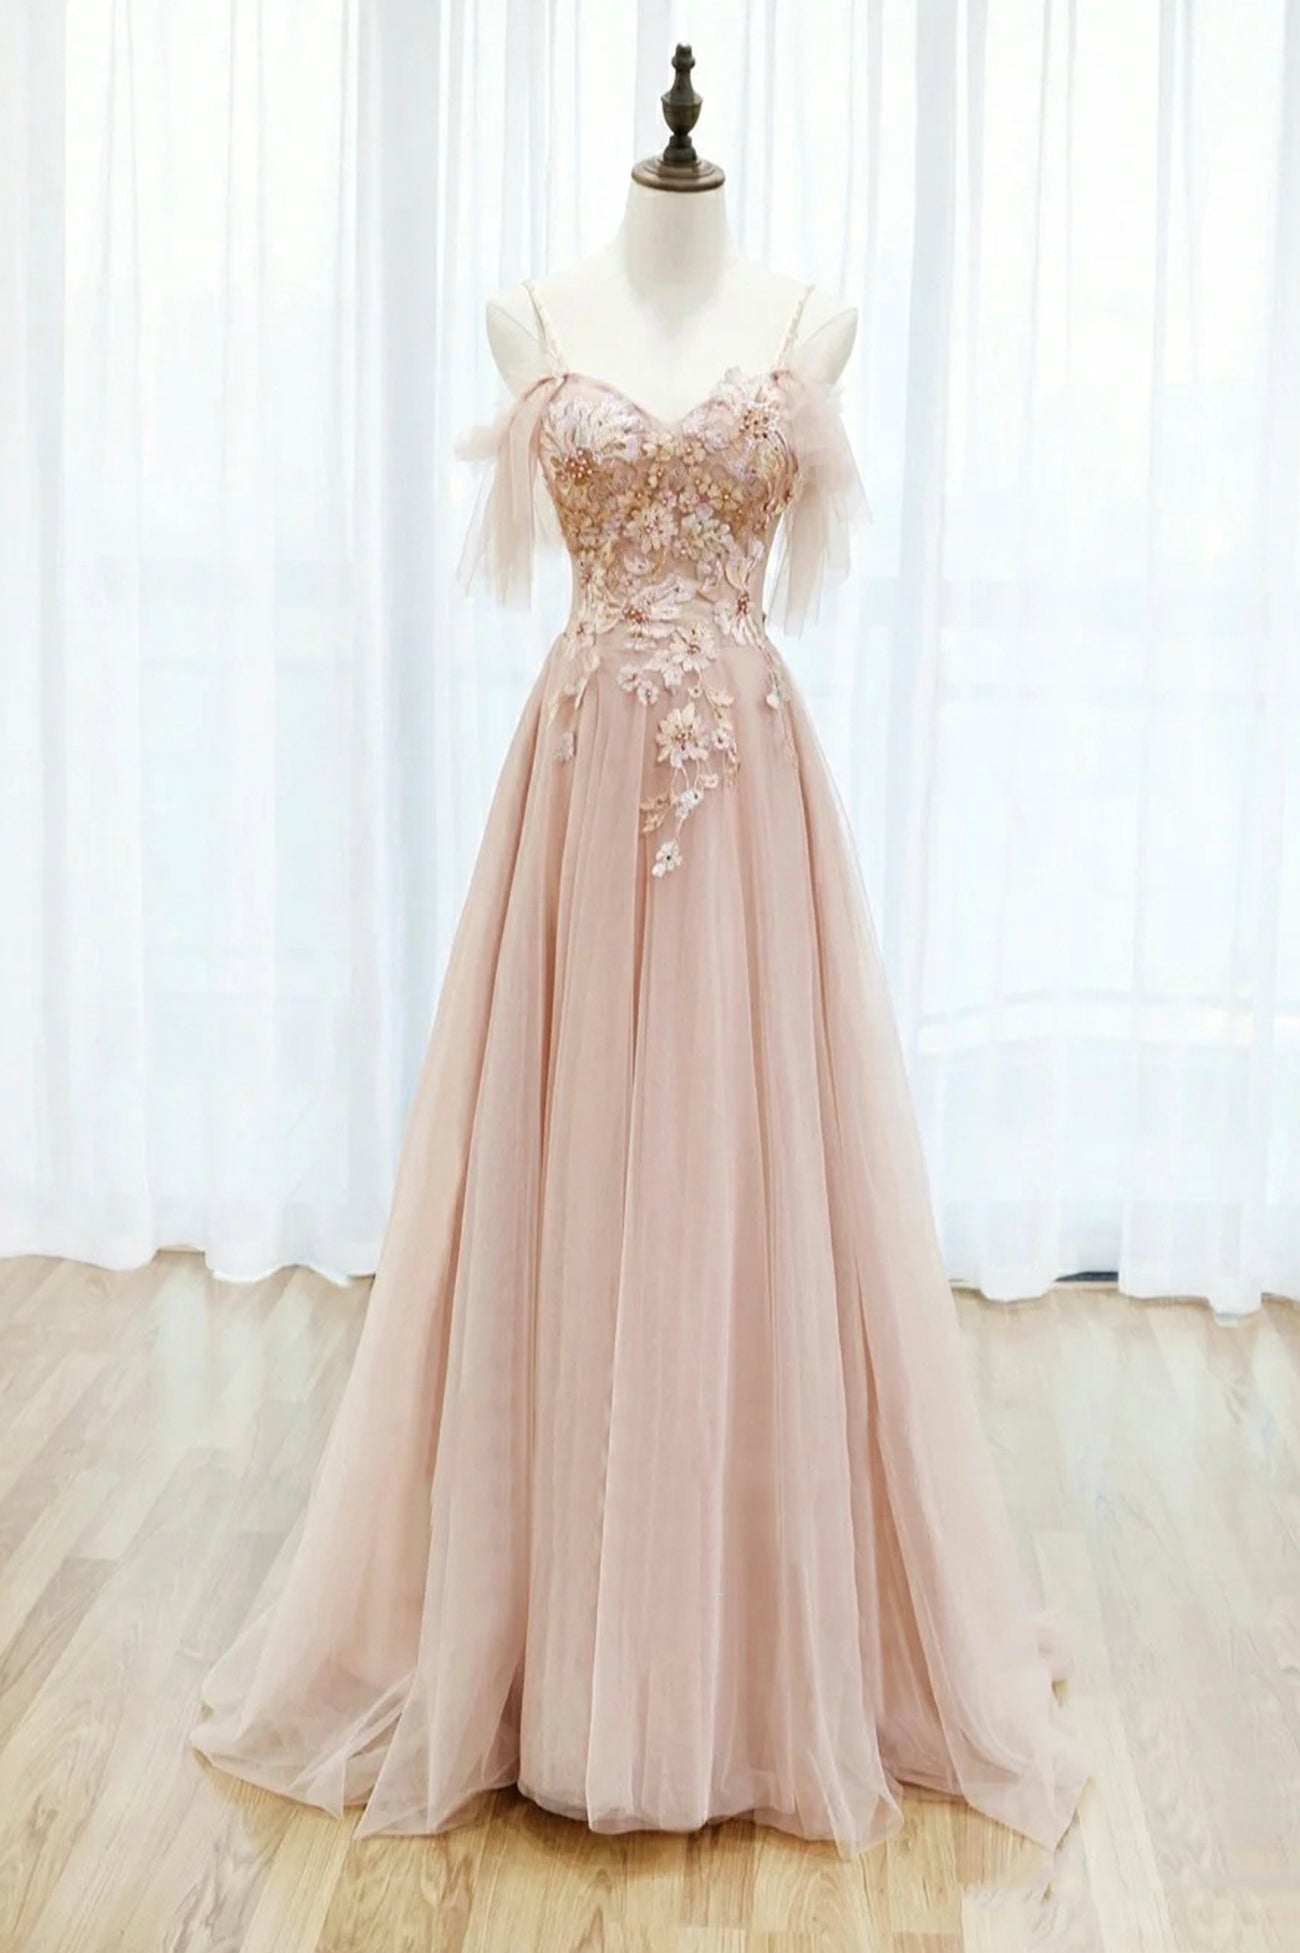 Homecoming Dresses Sparkles, Pink Tulle Lace Long A-Line Prom Dress, Spaghetti Strap Formal Evening Dress